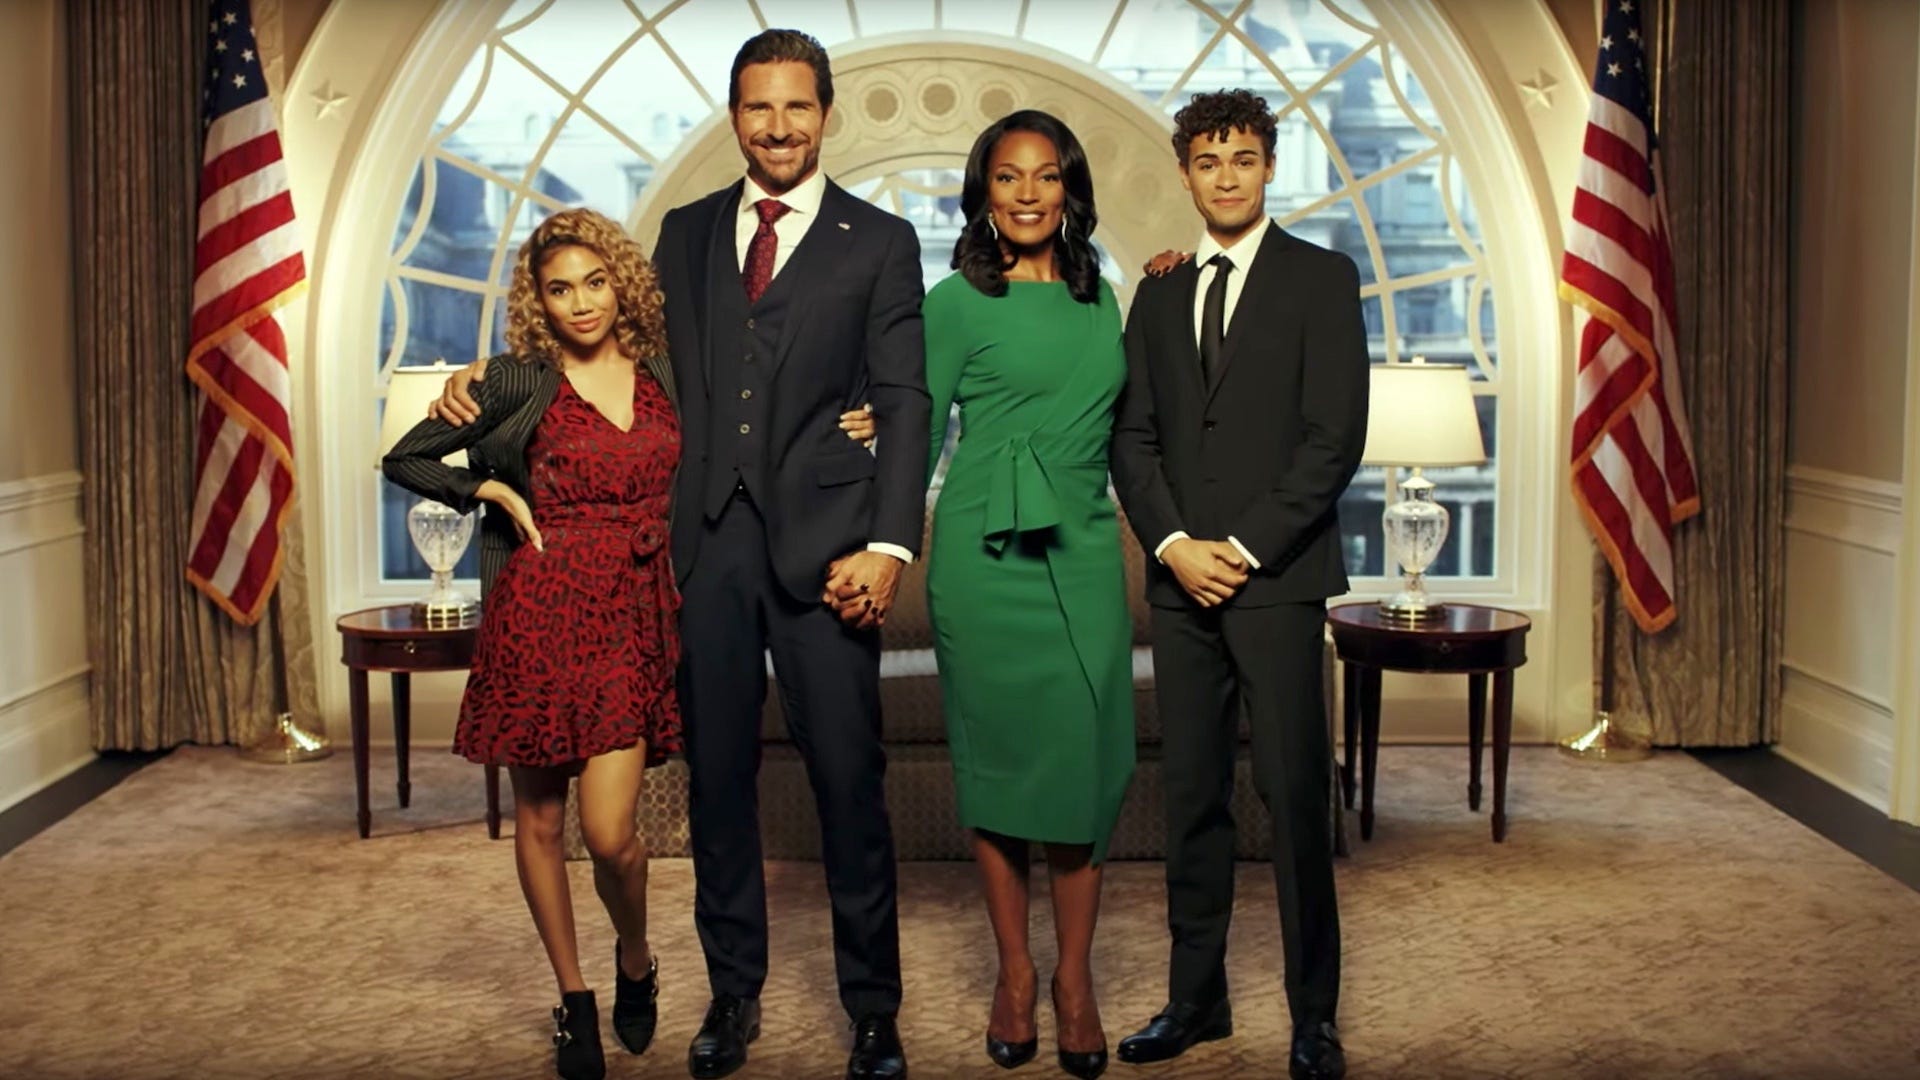 Full-[Episodes]! Watch The Oval (2019) Season 1 Episode 1 BET’s Online1920 x 1080